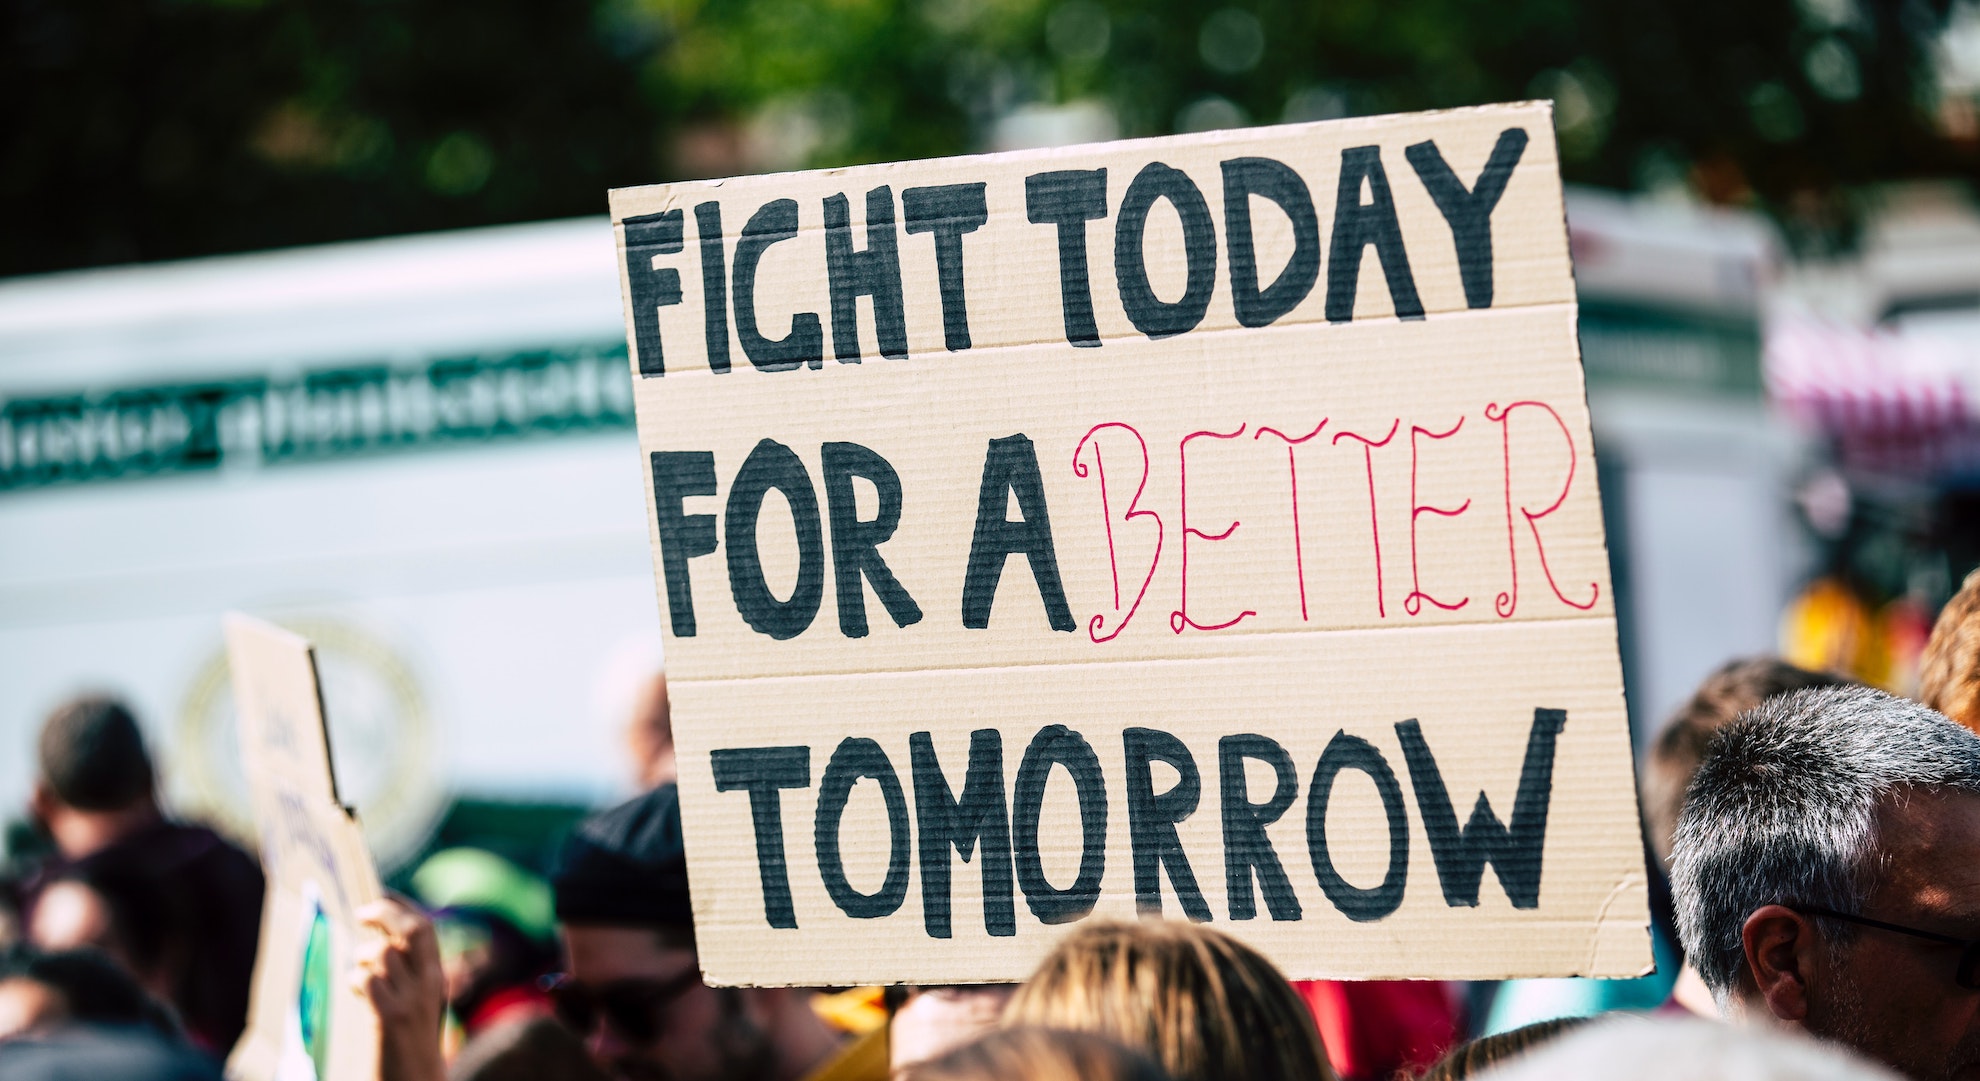 protest sign in Nuremberg that reads 'fight today for a better tomorrow'